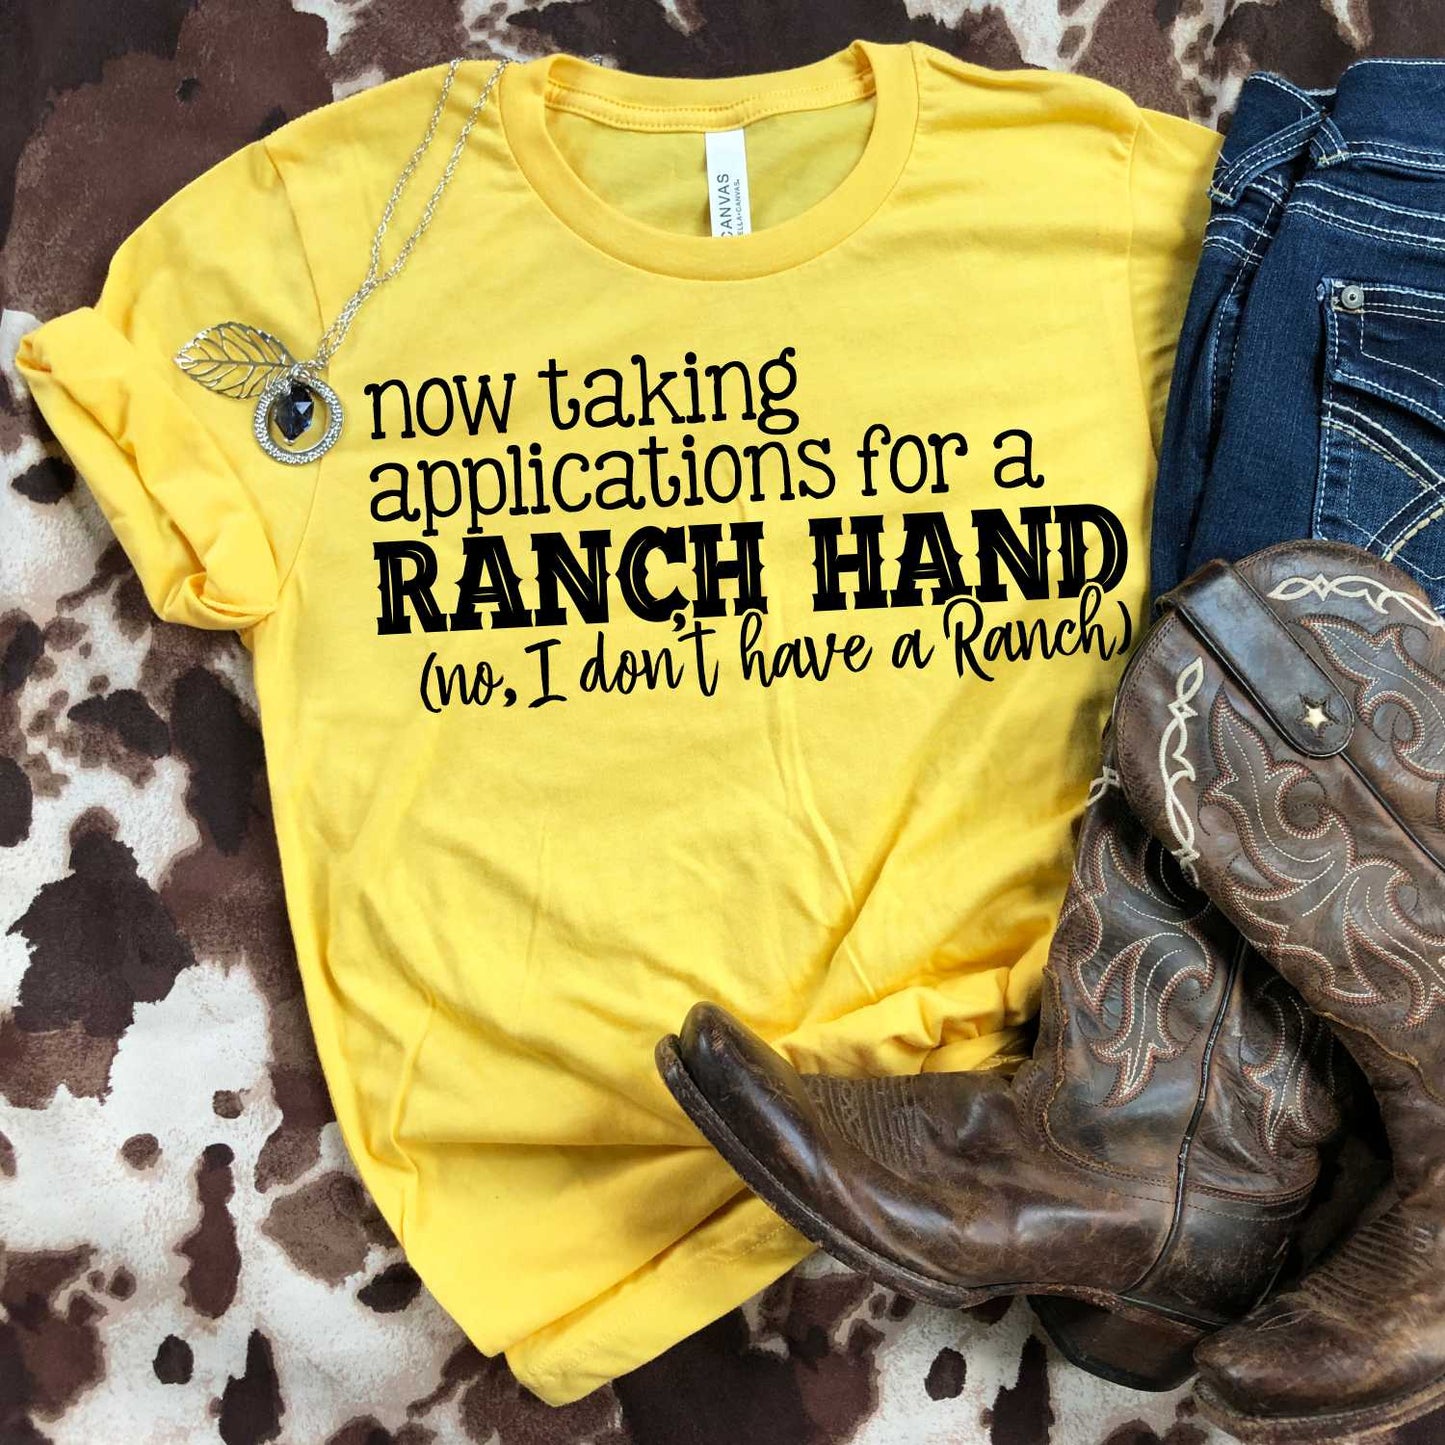 Now taking applications for a ranch hand